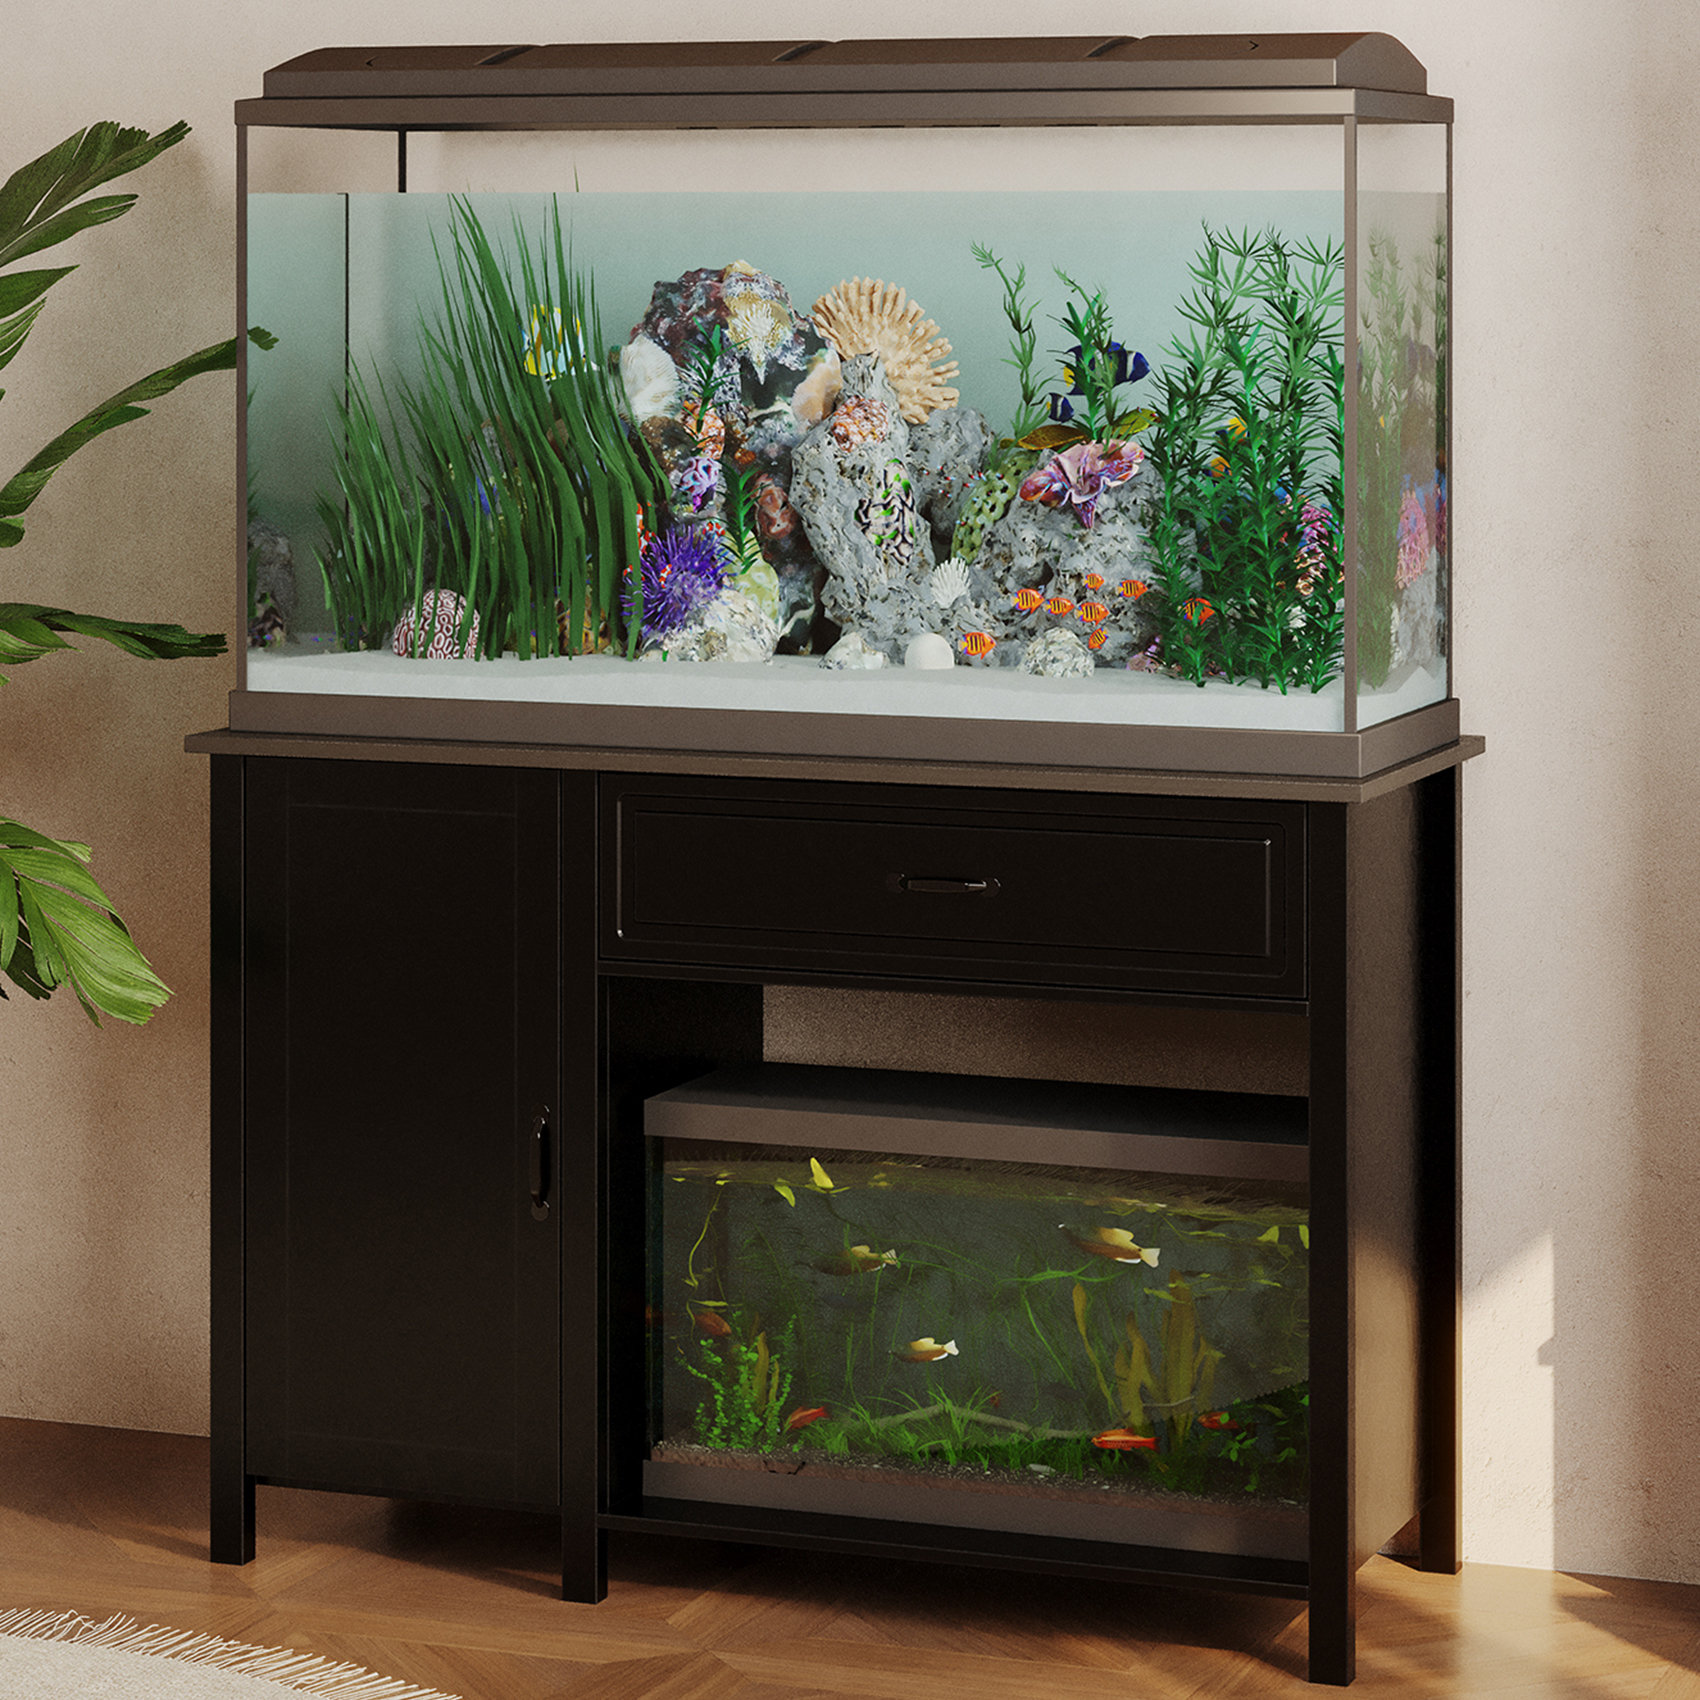 MOWPEX Fish Tank Stand - Heavy Duty Wooden 55-75 Gallon With Storage  Cabinet For Fish Tank Accessories - 770 LBS Capacity - Wayfair Canada